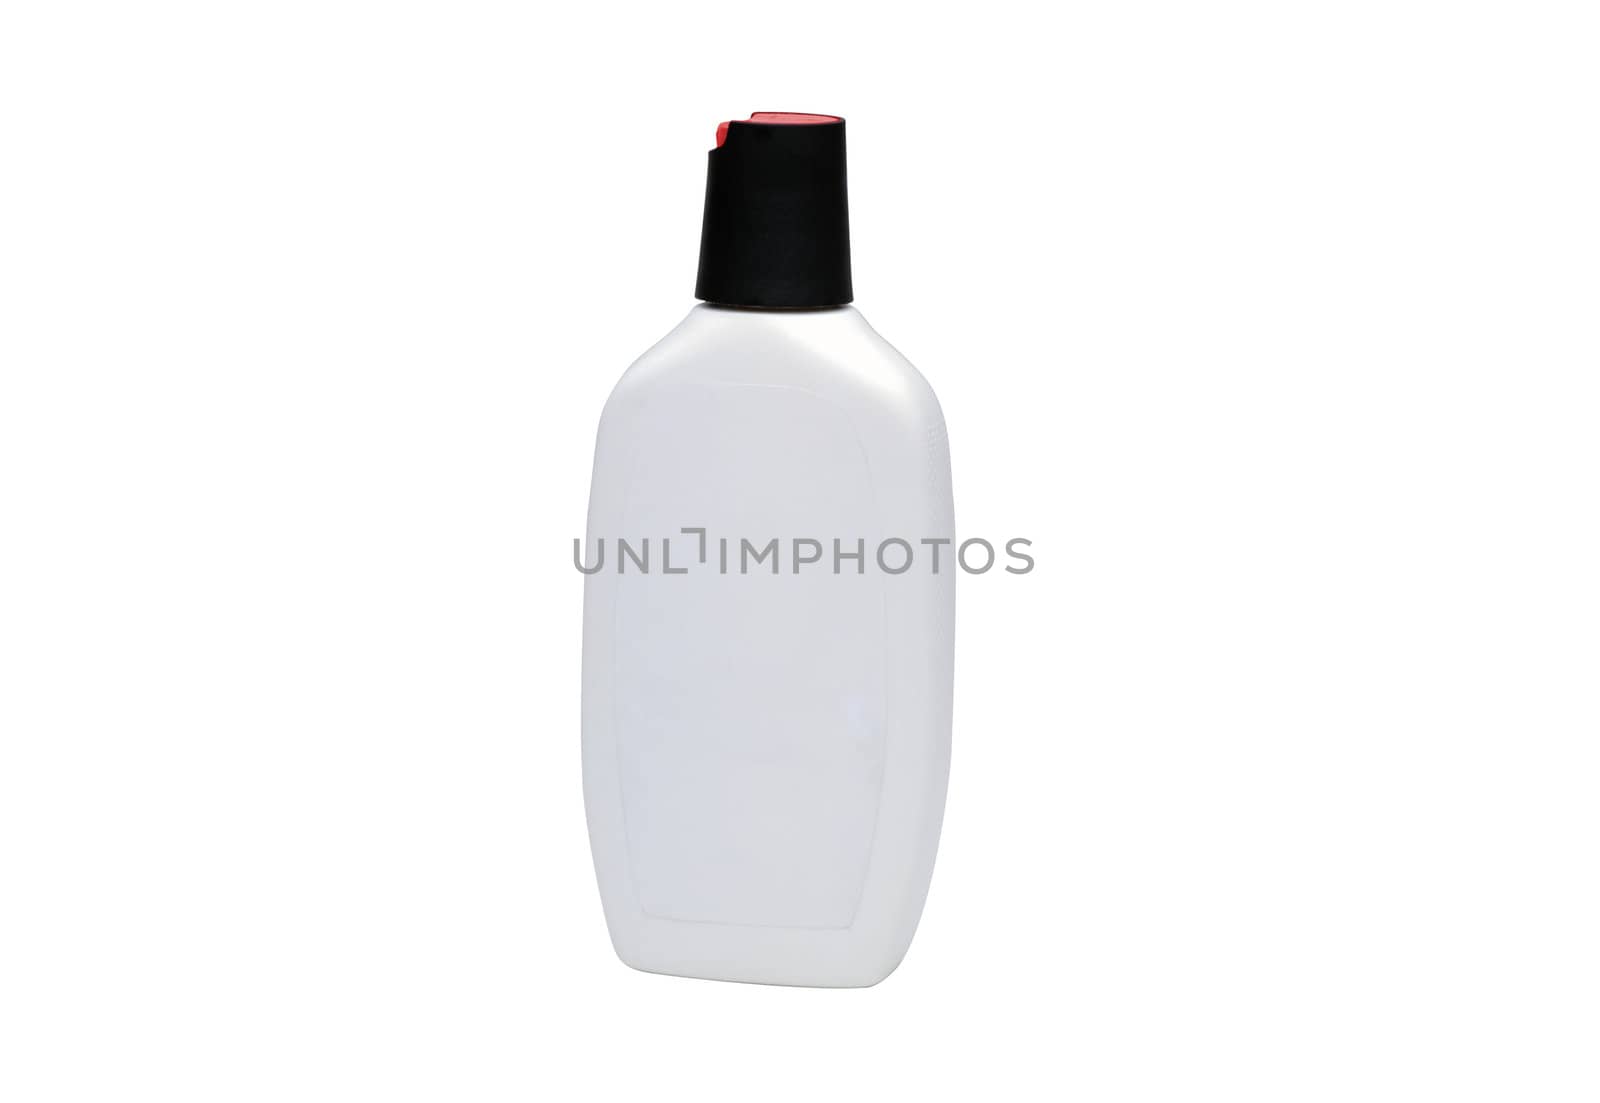 Shampoo bottle on the white backgrounds by shutswis